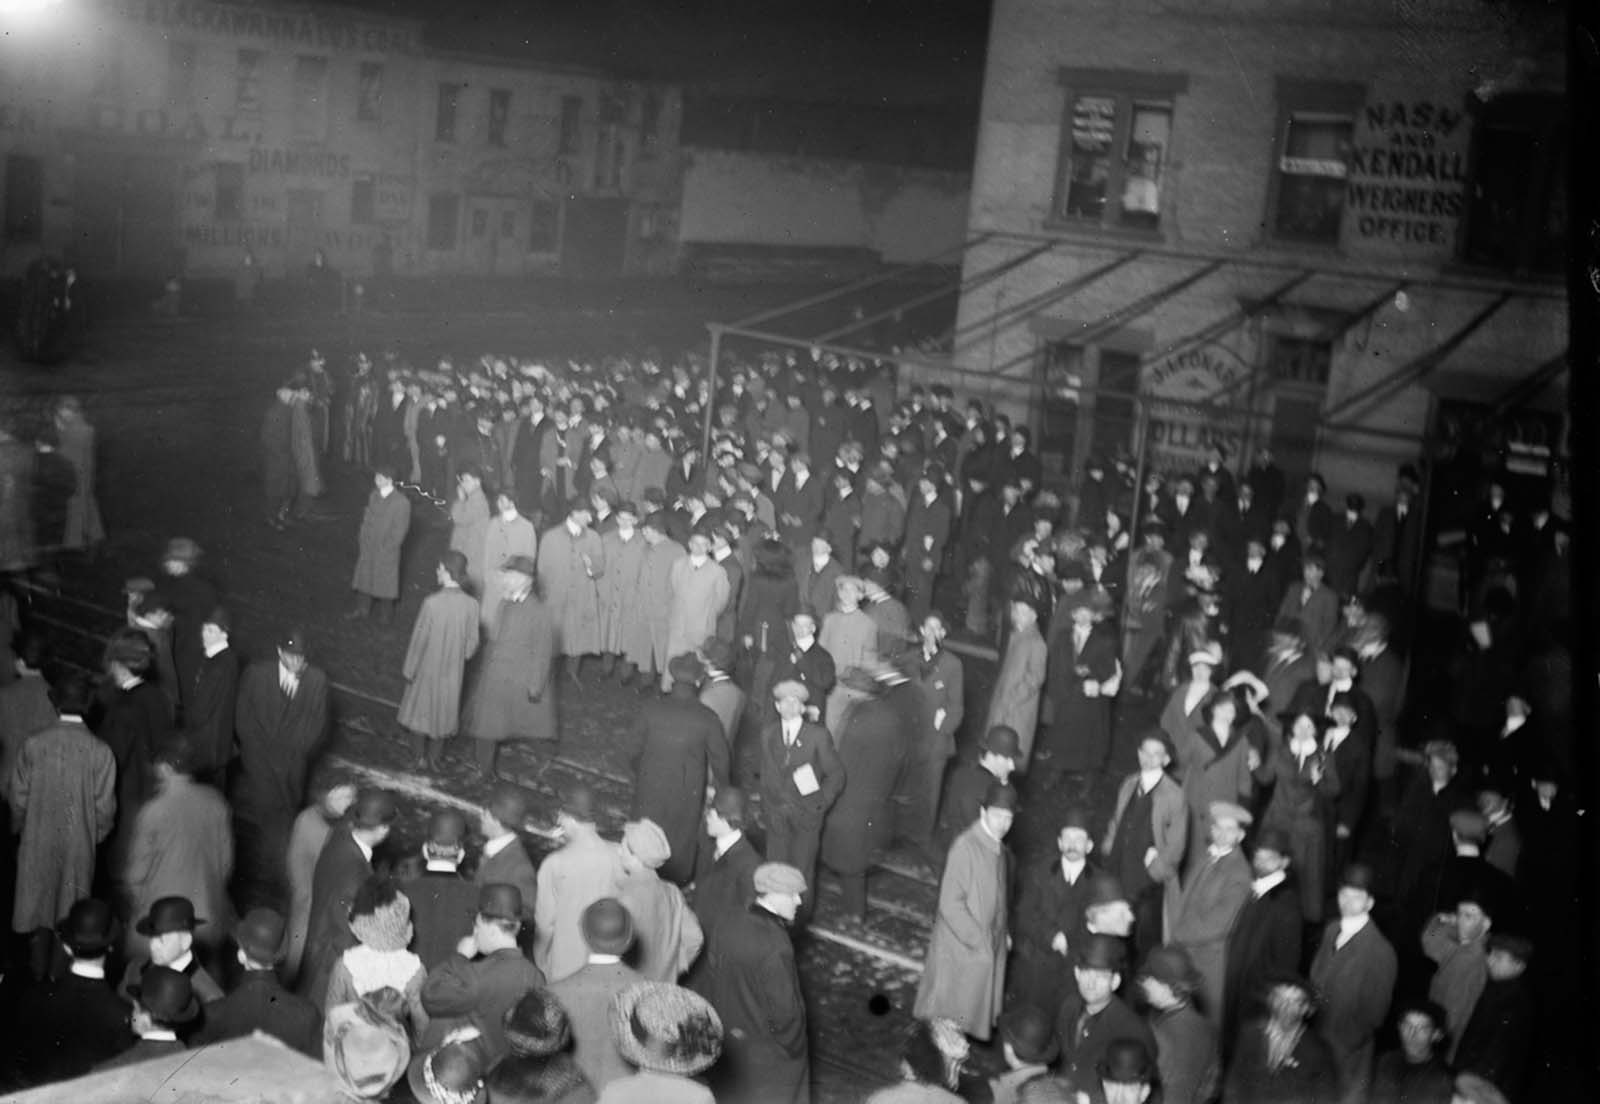 Crowds await the arrival of the Carpathia in New York.